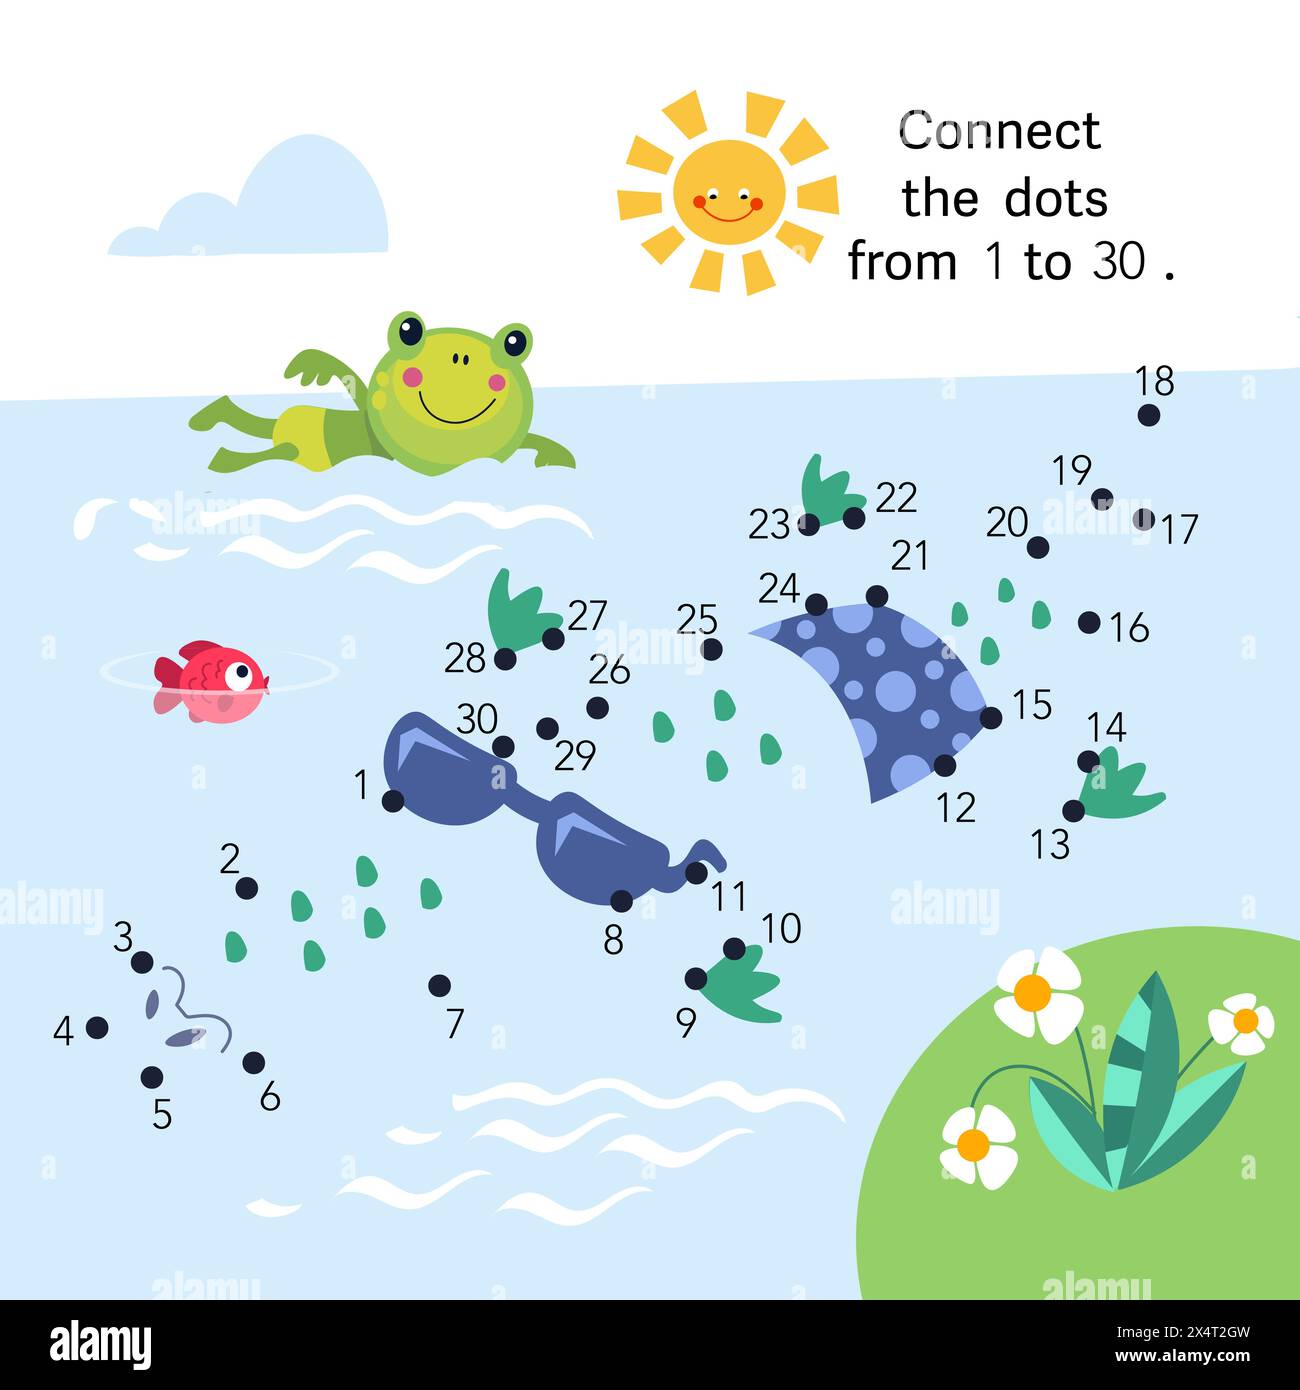 Dot to dot. Connect the dots from 1 to 30. Puzzle game for kids. Cute crocodile in summer. Vector illustration Stock Vector